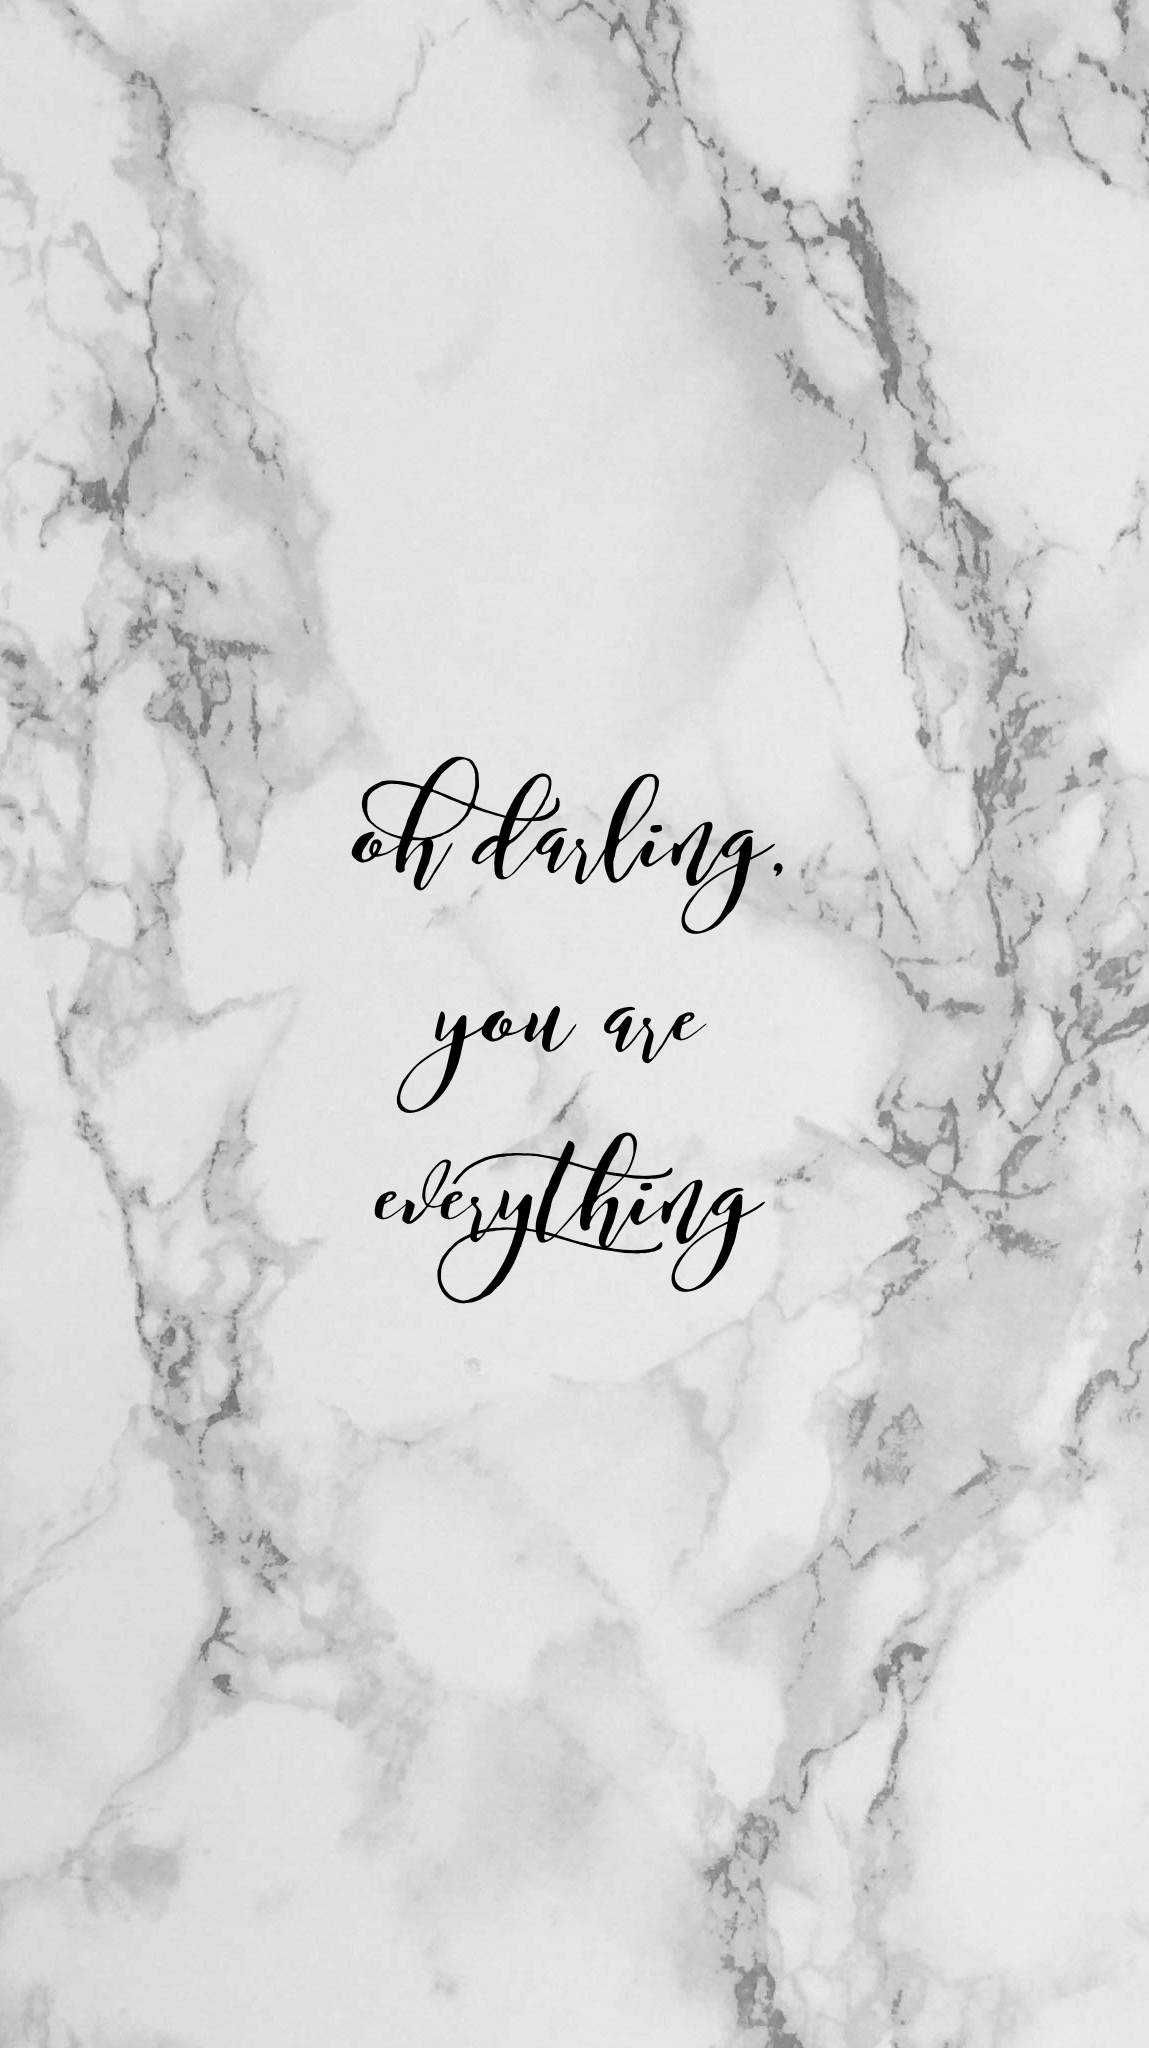 Oh darling, you are everything. marble background phone wallpaper - Marble